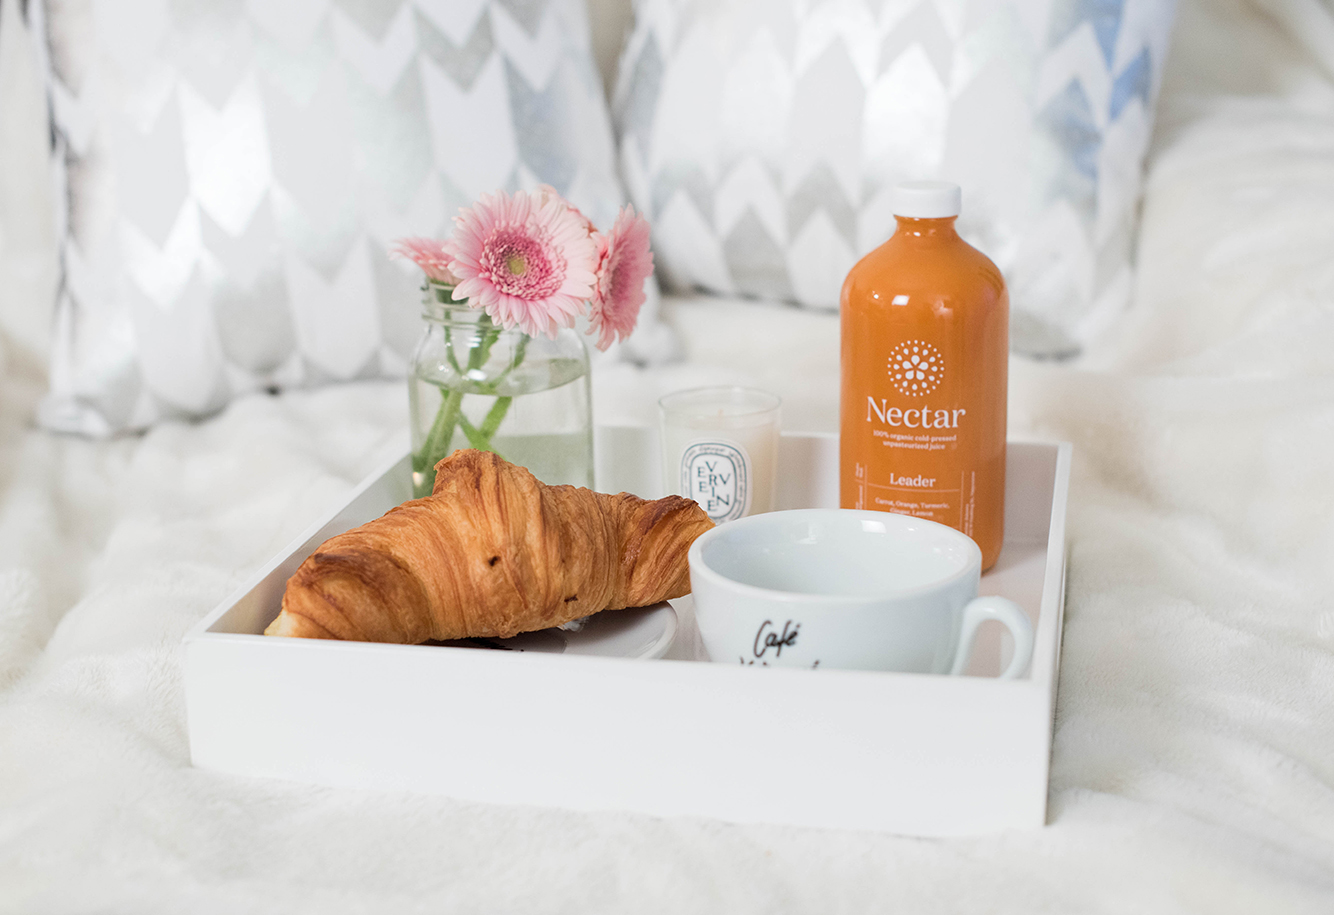 coco-and-vera-best-vancouver-fashion-blog-best-canadian-fashion-blog-top-blogger-breakfast-tray-nectar-juicery-leader-juice-diptyque-verveine-candle-pink-daises-croissant